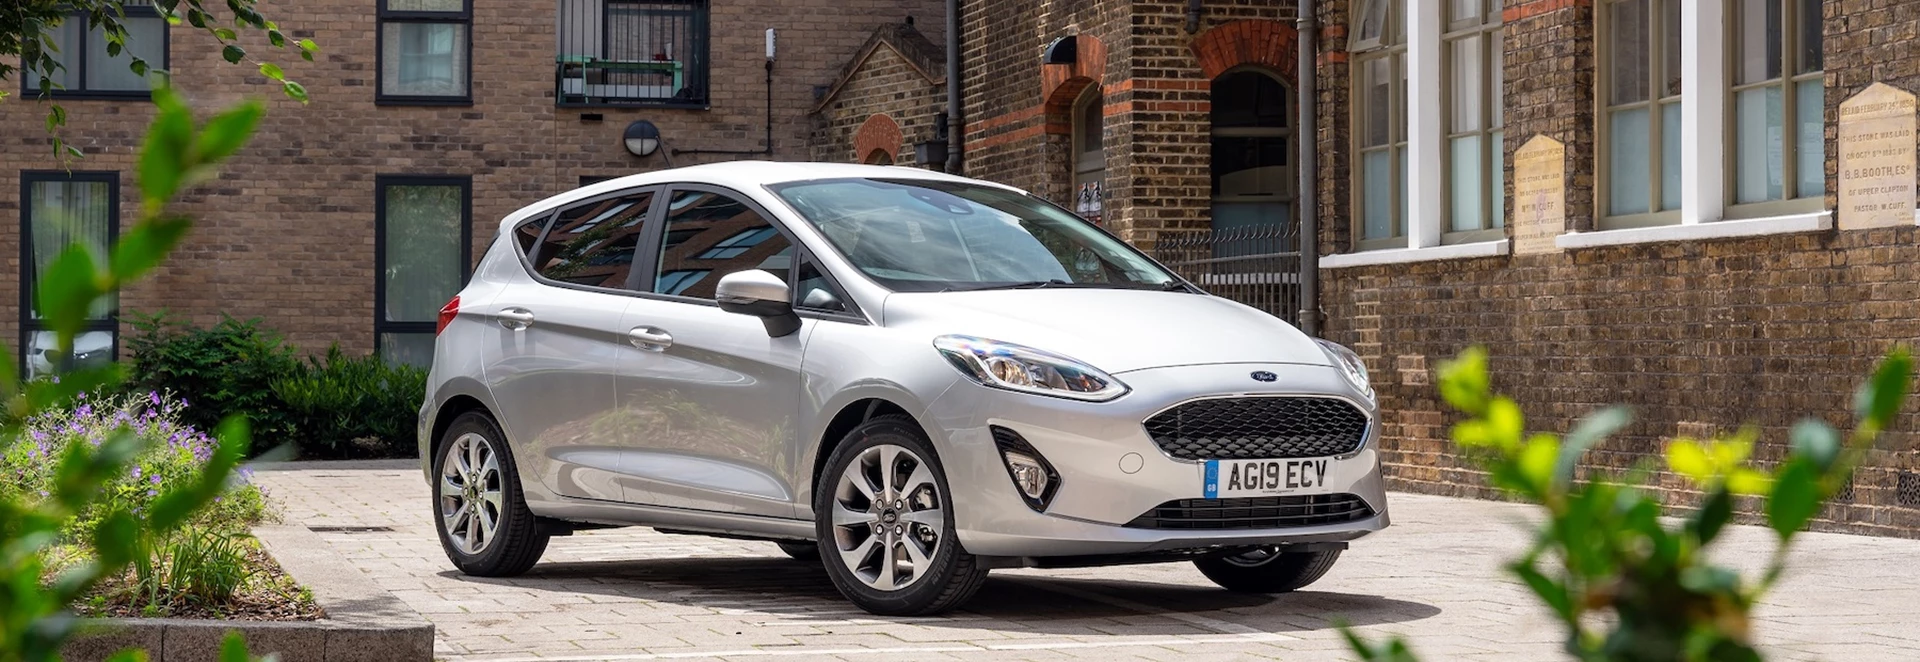 Ford introduces new Trend trim level to the Fiesta to replace Zetec